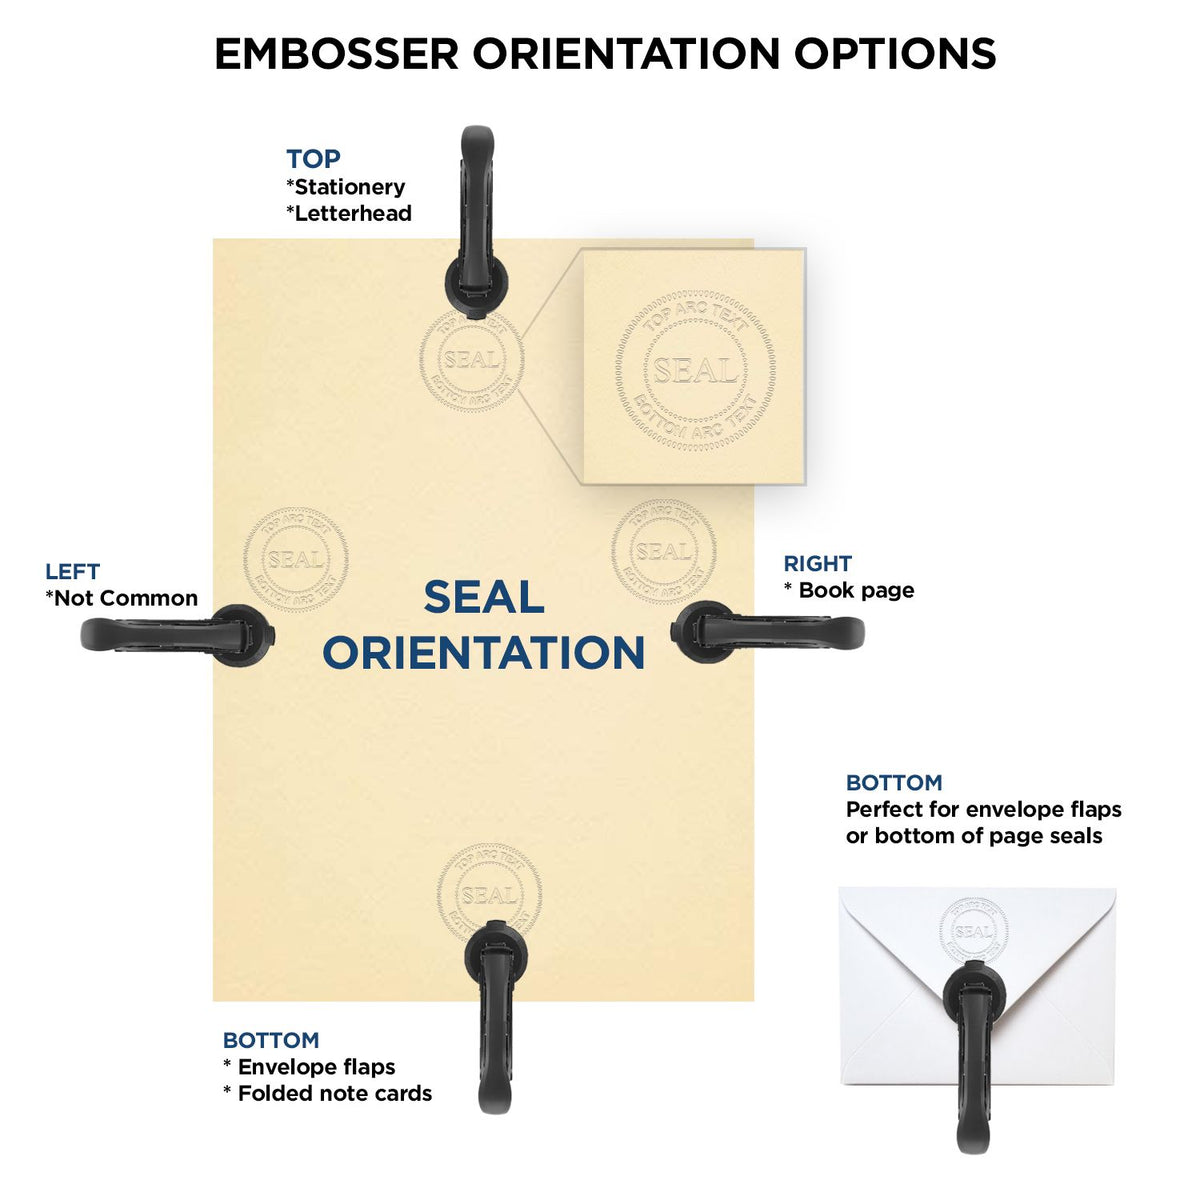 An infographic for the Heavy Duty Cast Iron New York Engineer Seal Embosser showing embosser orientation, this is showing examples of a top, bottom, right and left insert.